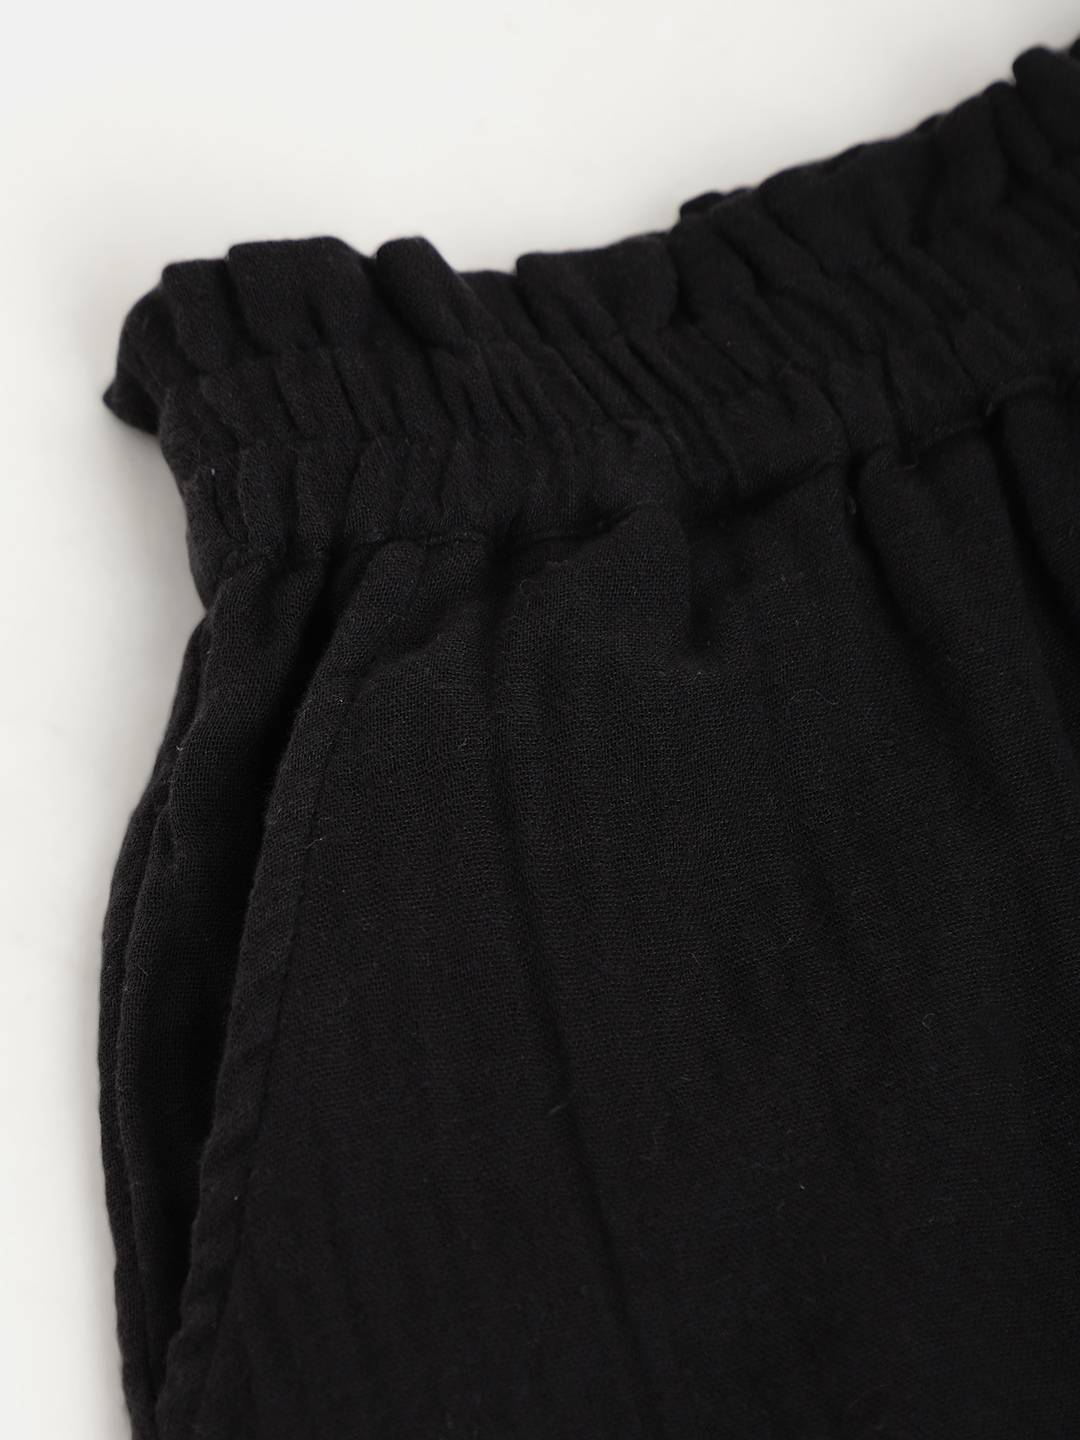 Black Cotton Trouser with waist frill & side pockets